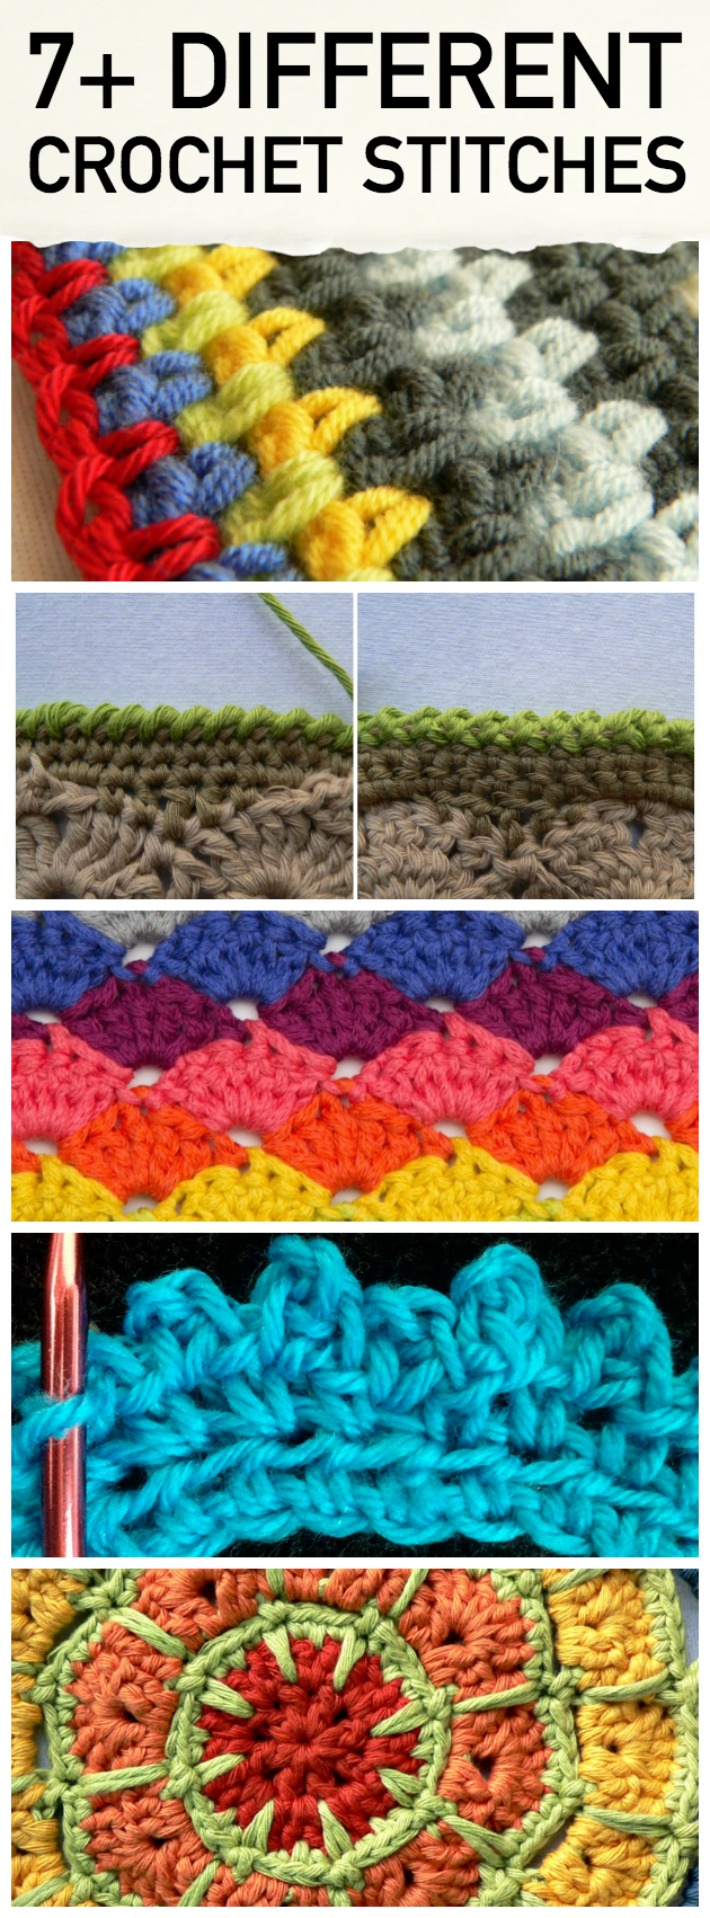 Discover new, exciting crochet stitches that add texture, color and interest to all your projects — on Bluprint!